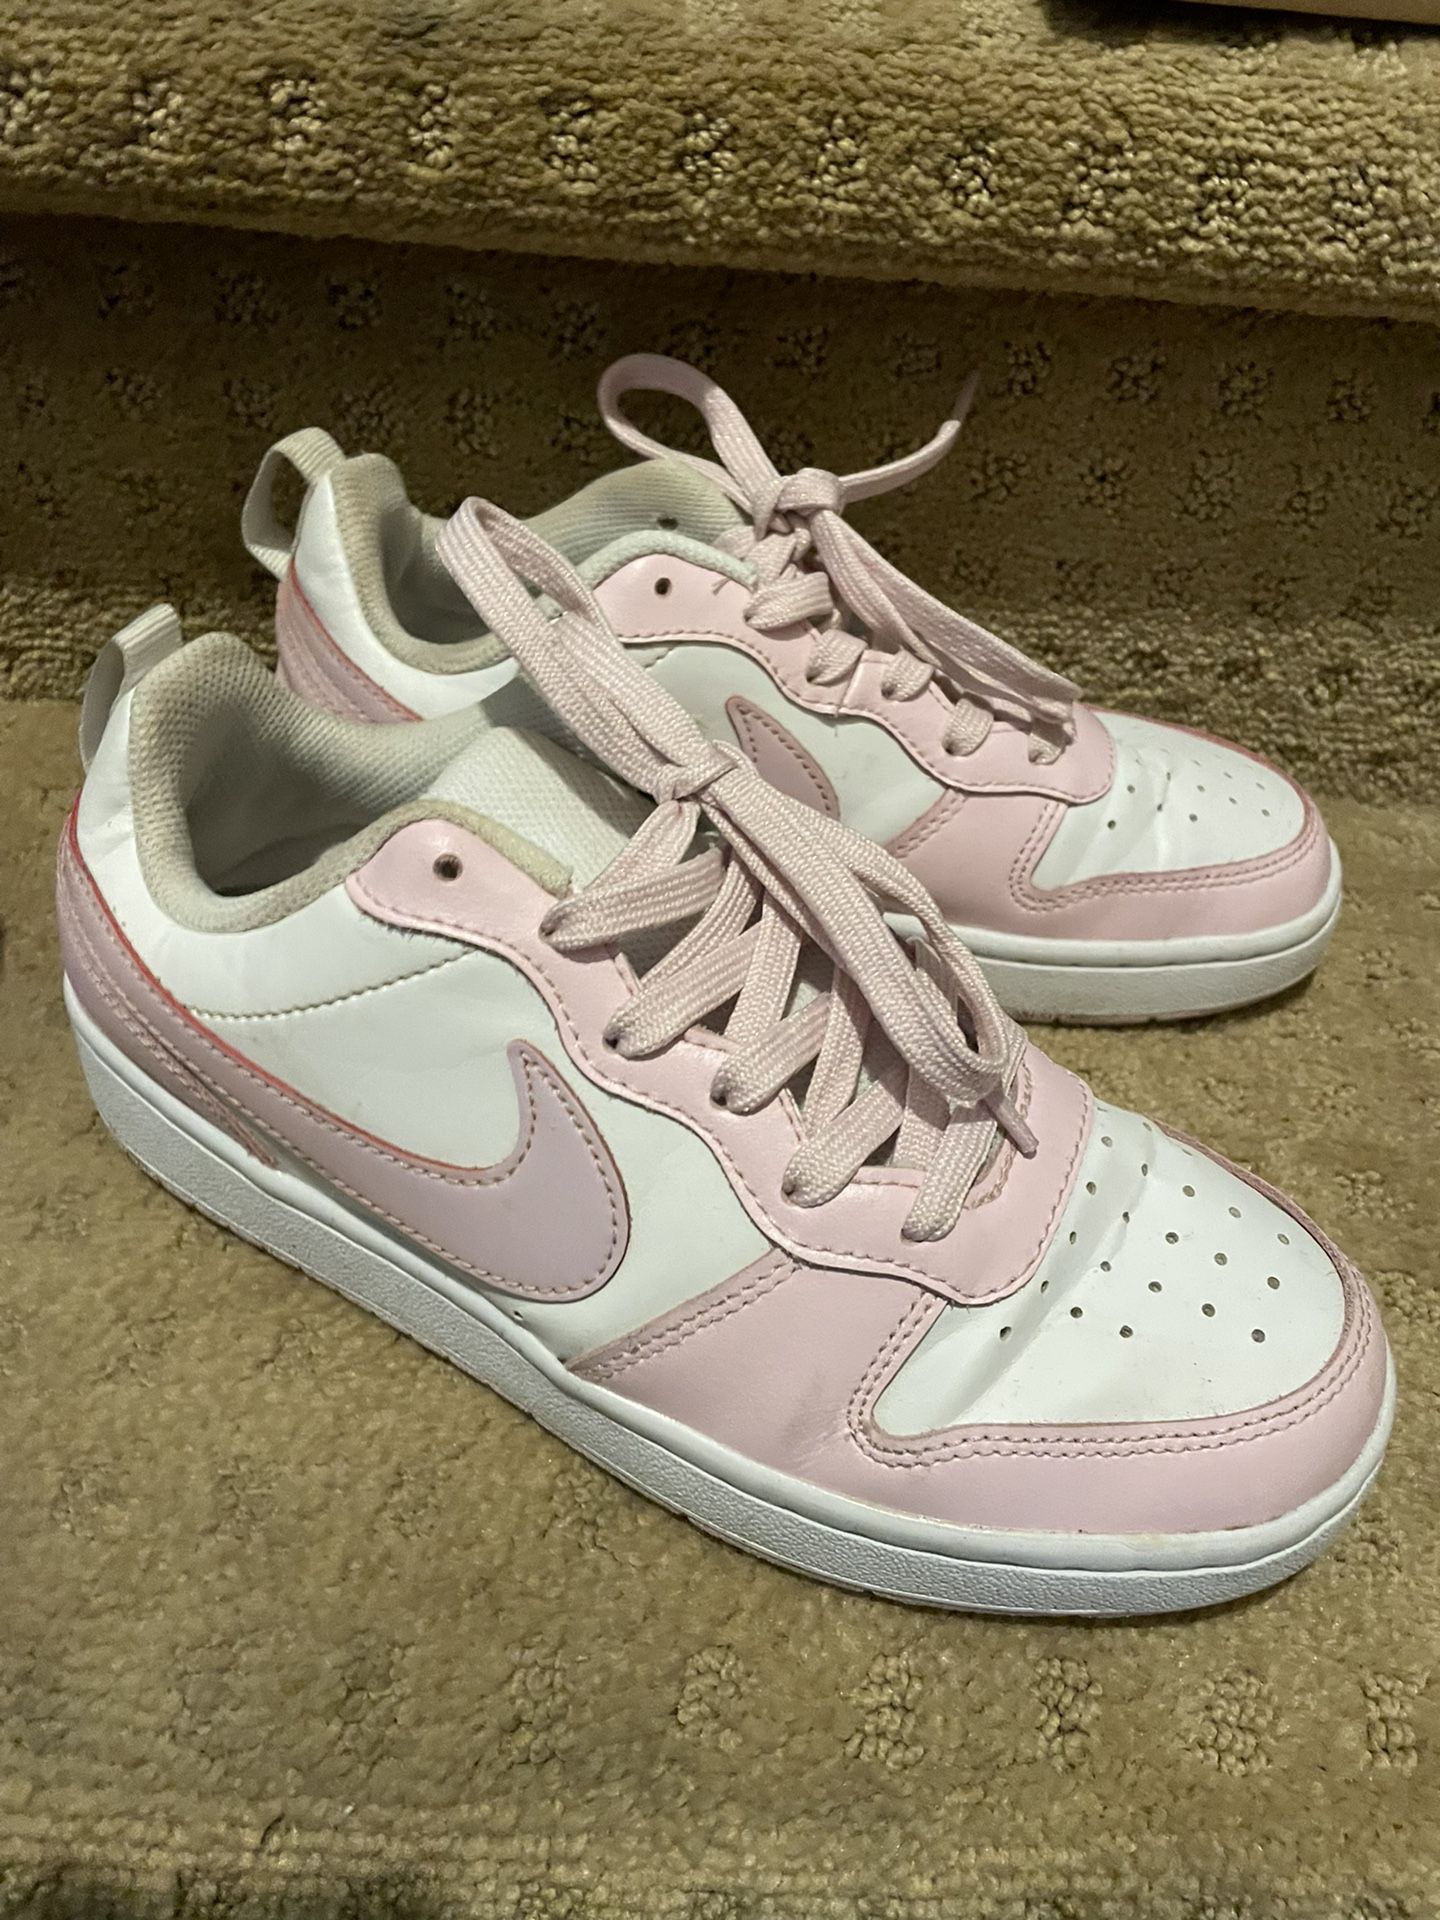 Good Condition Nike 